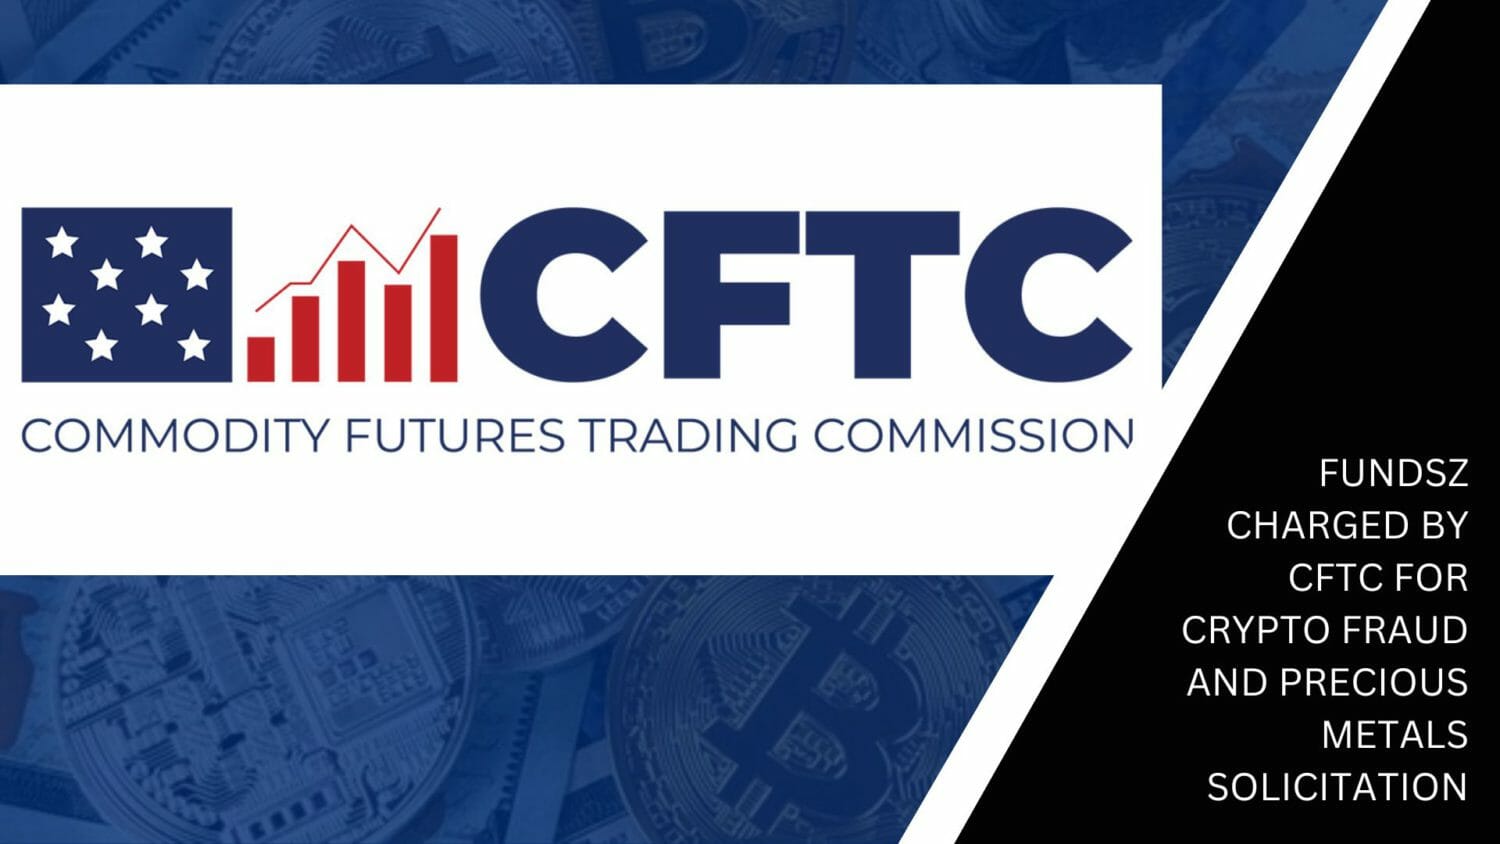 Fundsz Charged By Cftc For Crypto Fraud And Precious Metals Solicitation